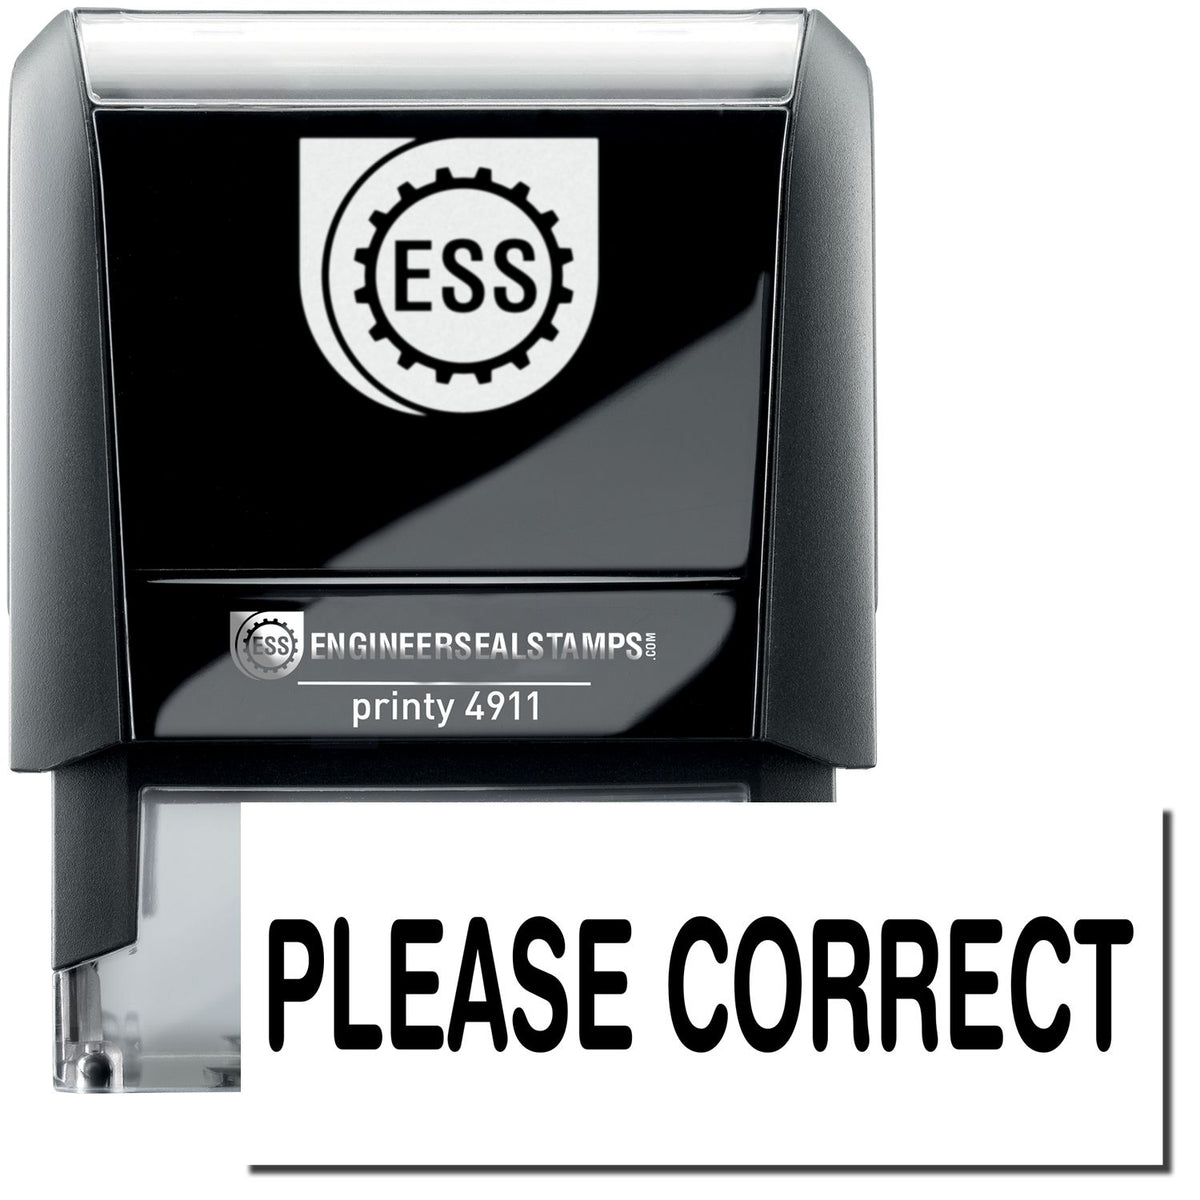 A self-inking stamp with a stamped image showing how the text &quot;PLEASE CORRECT&quot; is displayed after stamping.